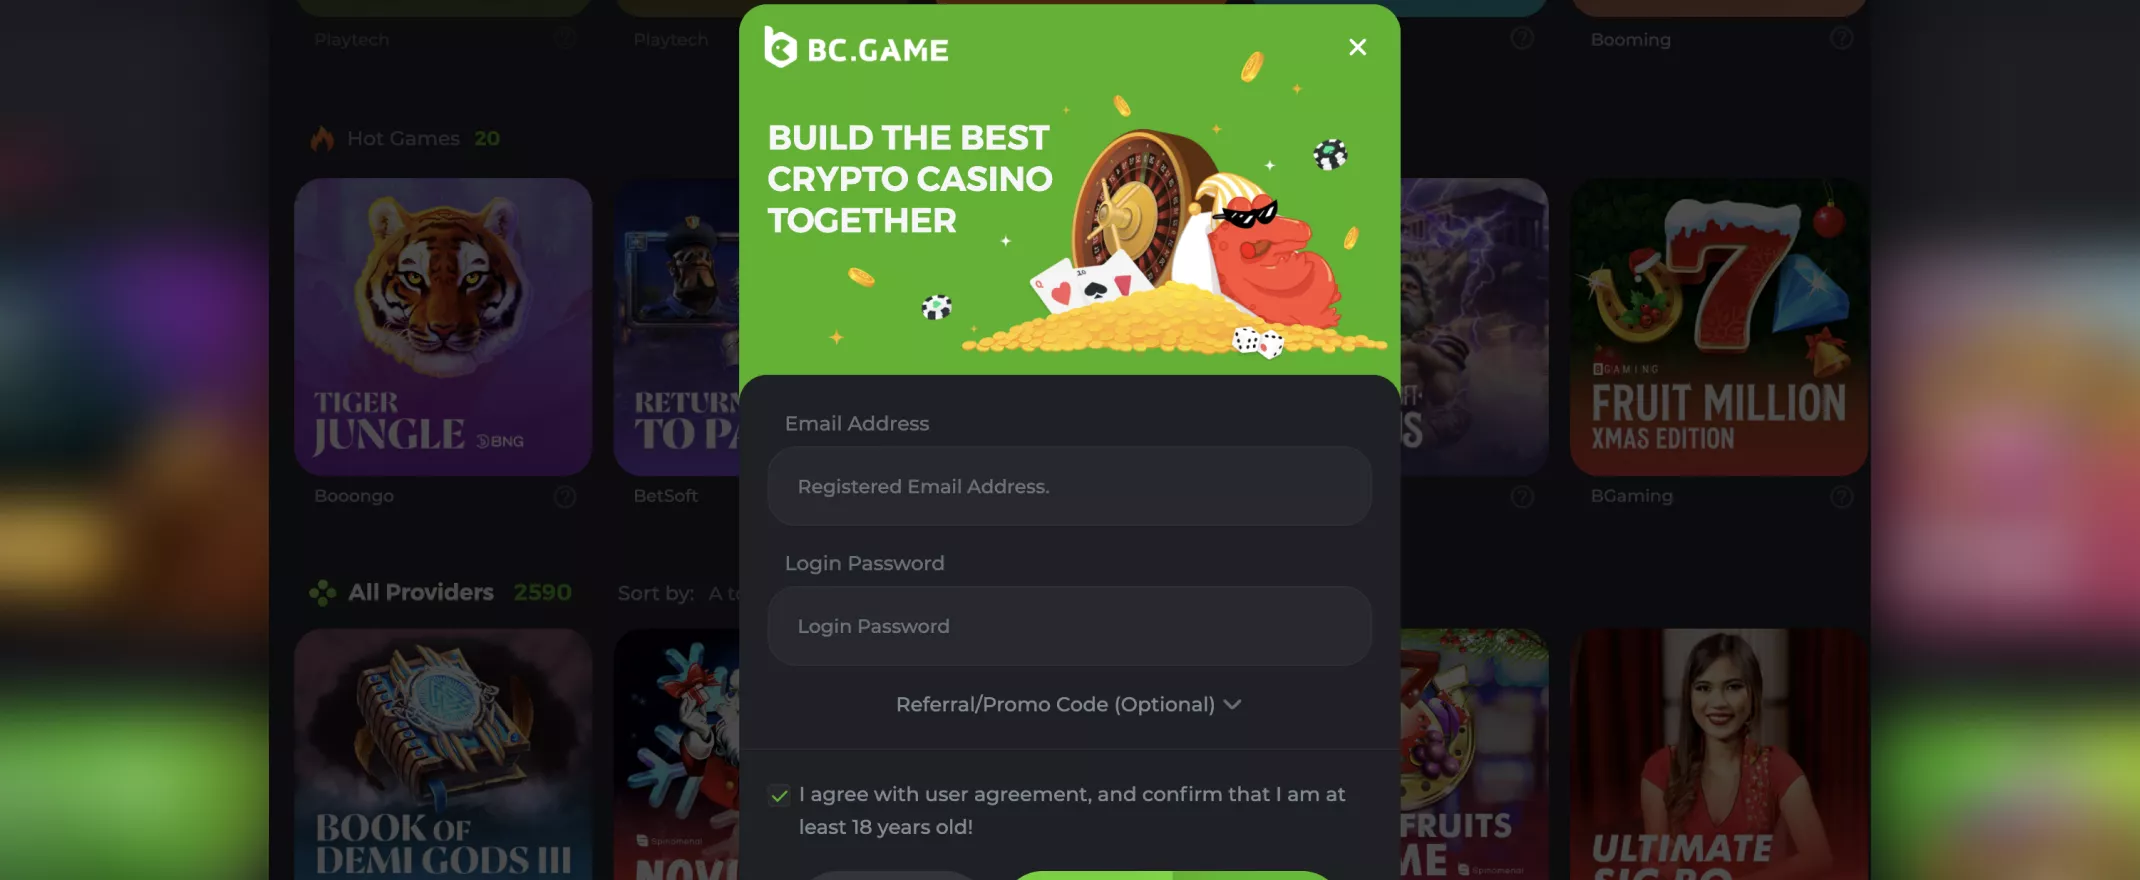 9 Key Tactics The Pros Use For BC Game Crash online casino game